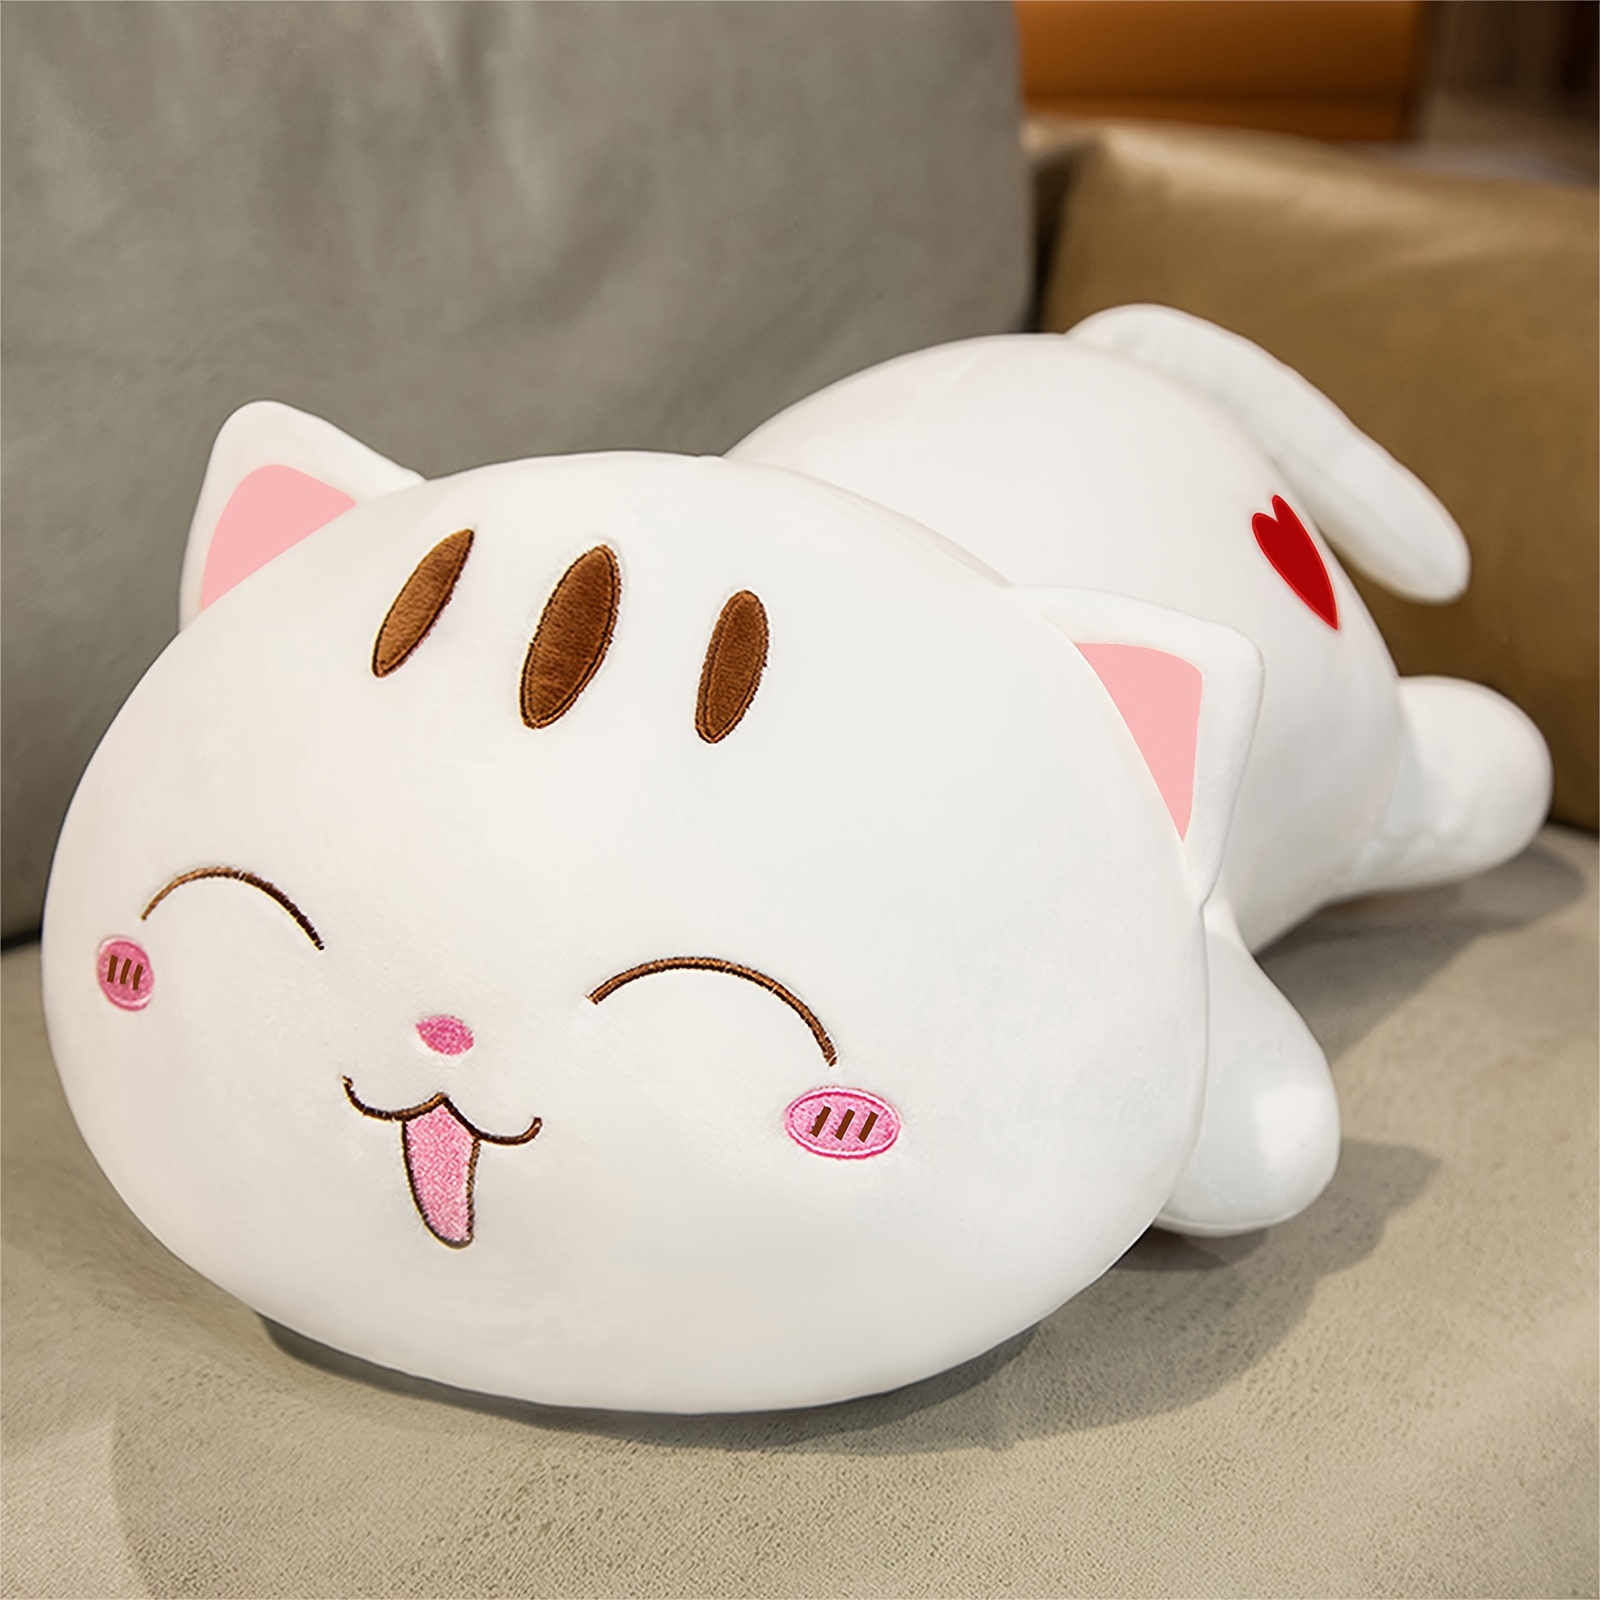 

25cm/9.84in Cute Cat Plush Toy Stuffed Animal Toy, Cute And Soft Animal Pillows Perfect Birthday Gift Holiday Decorations Christmas Gift For Family And Friends